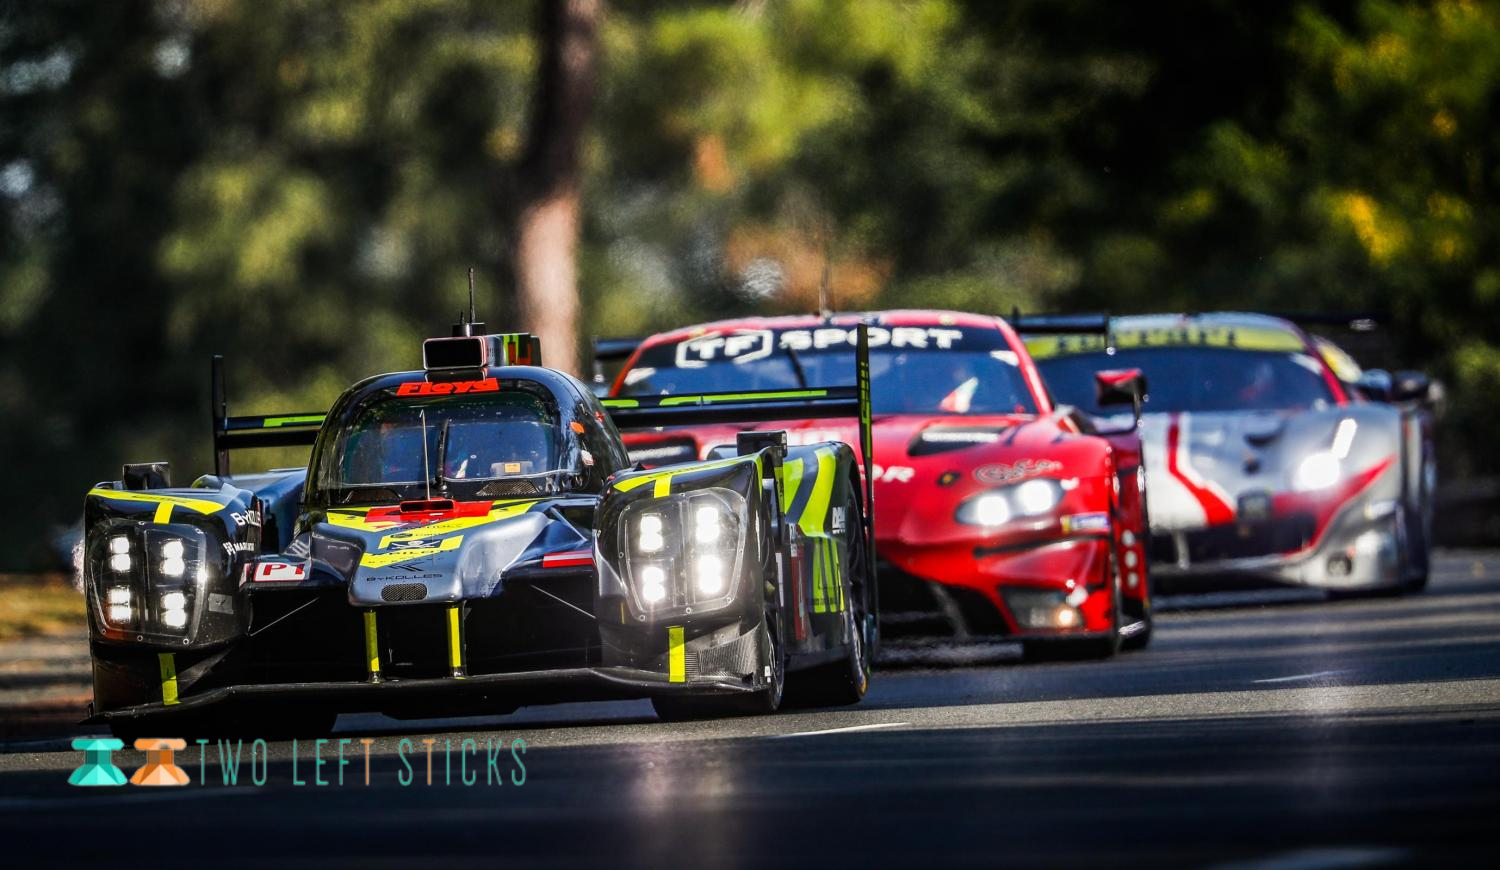 The 24 hours of Le Mans